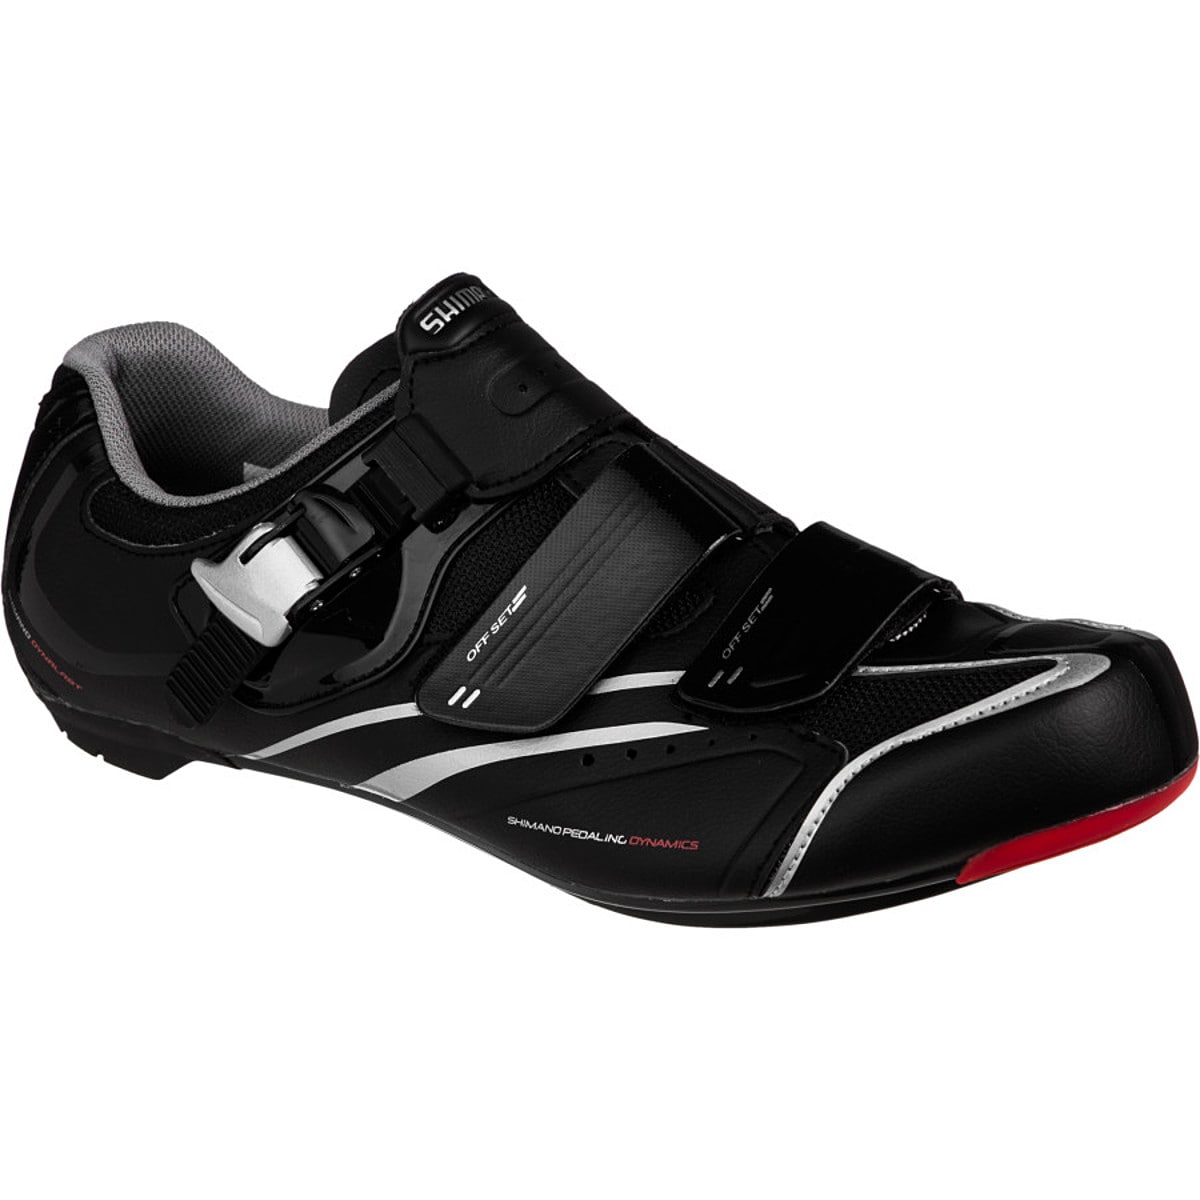 Shimano SH-R088 Shoes - Road Shoes | Competitive Cyclist